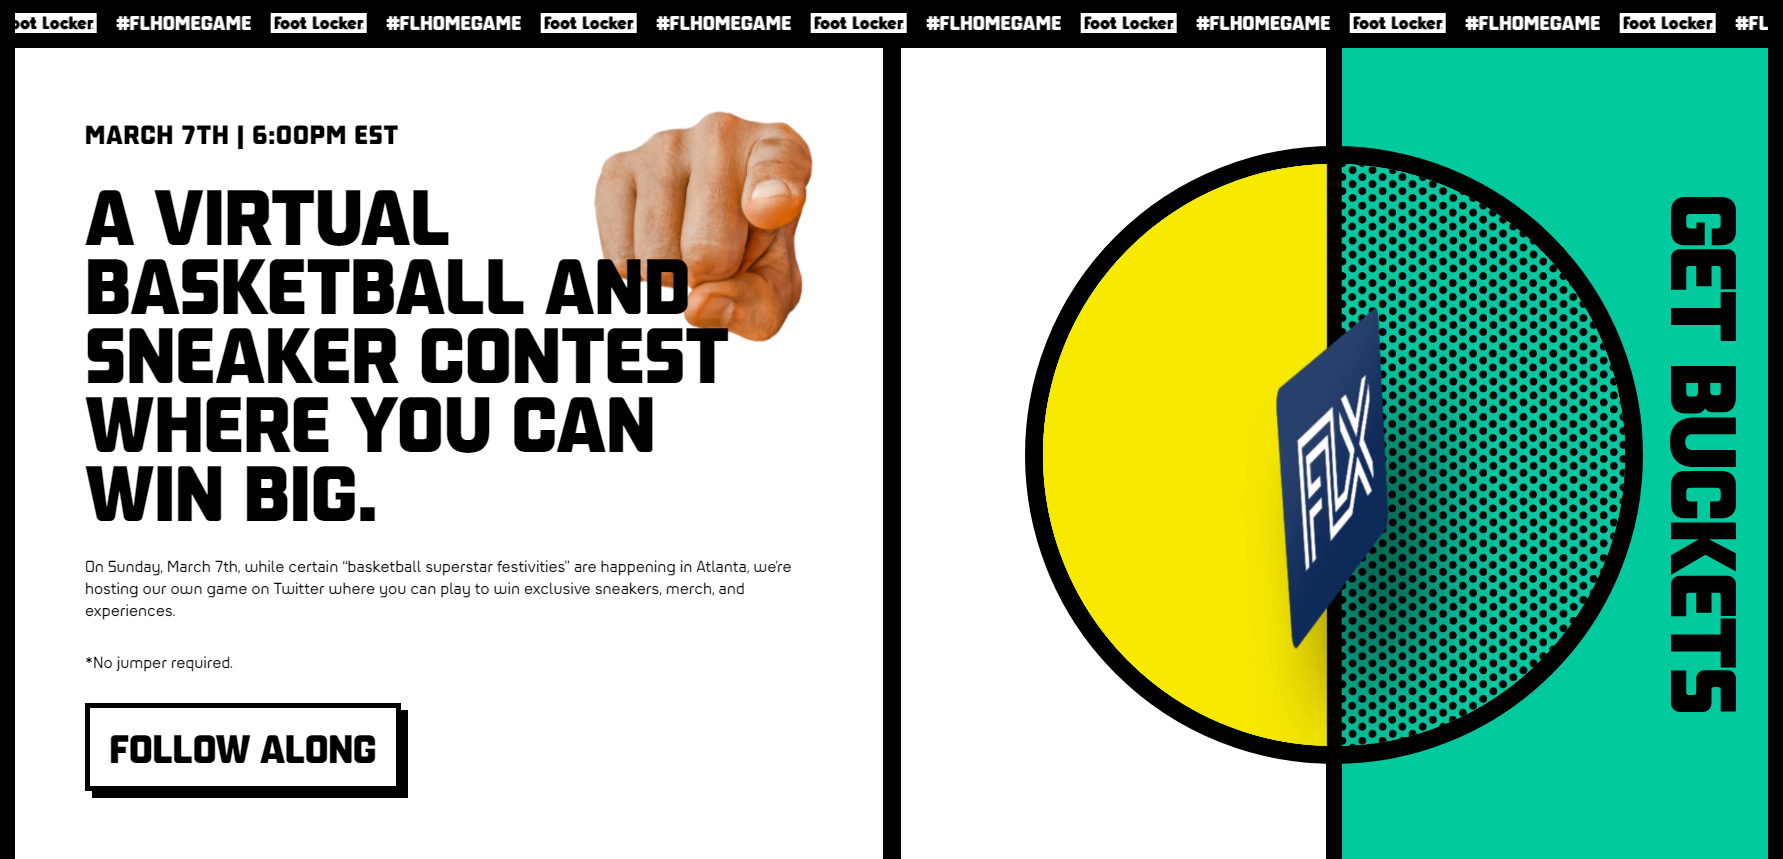 Foot Locker's Home Game - Website of the Day